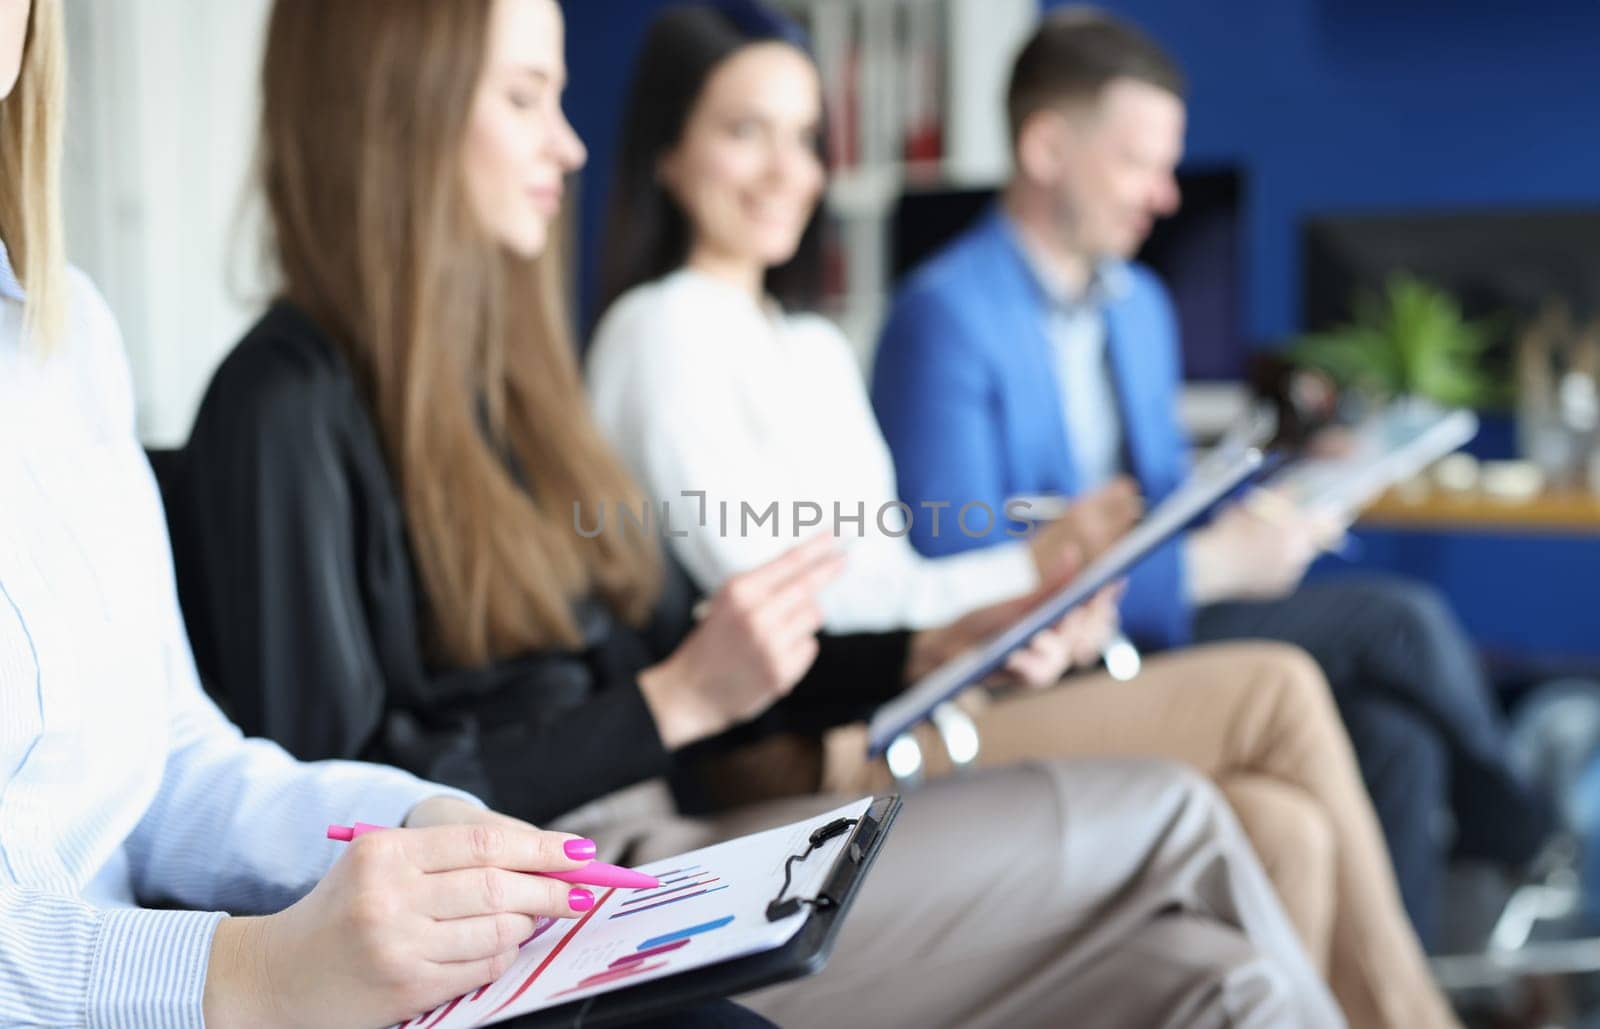 Group of people sitting at business seminar with documents and charts in their hands closeup. Conducting educational business meetings concept